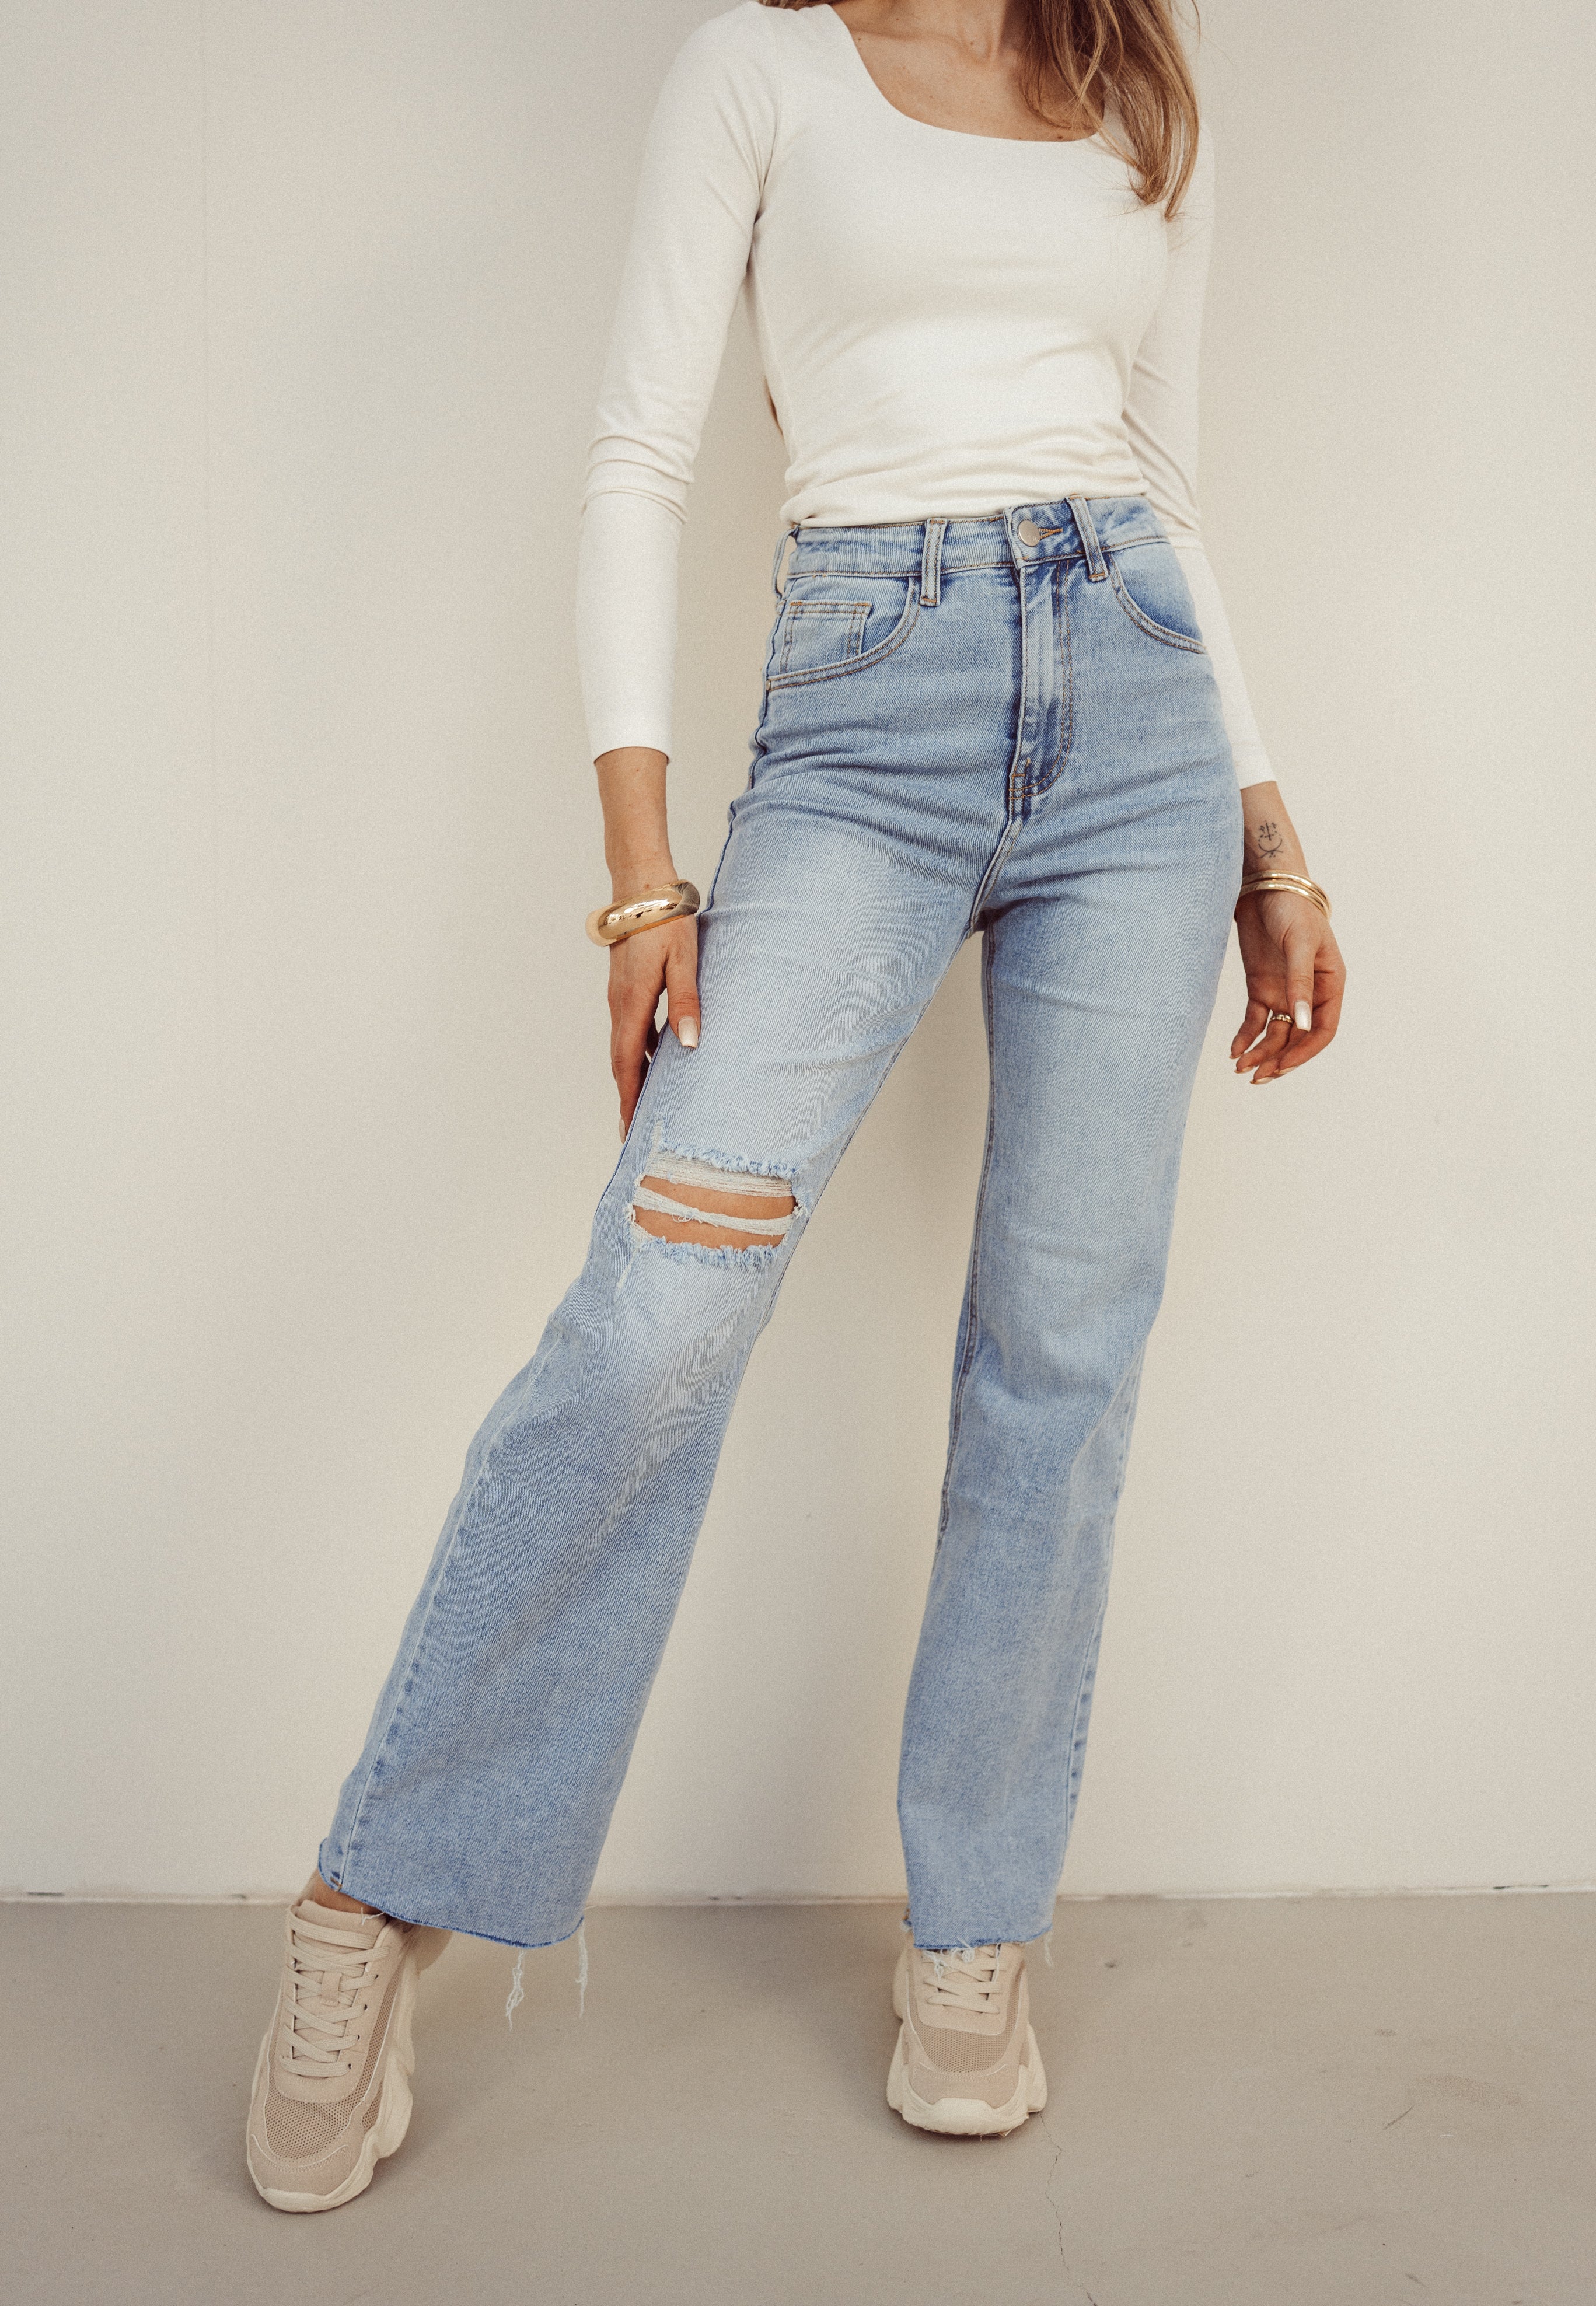 LESTER - Ripped Cut Off Wide Leg Jeans in Blue